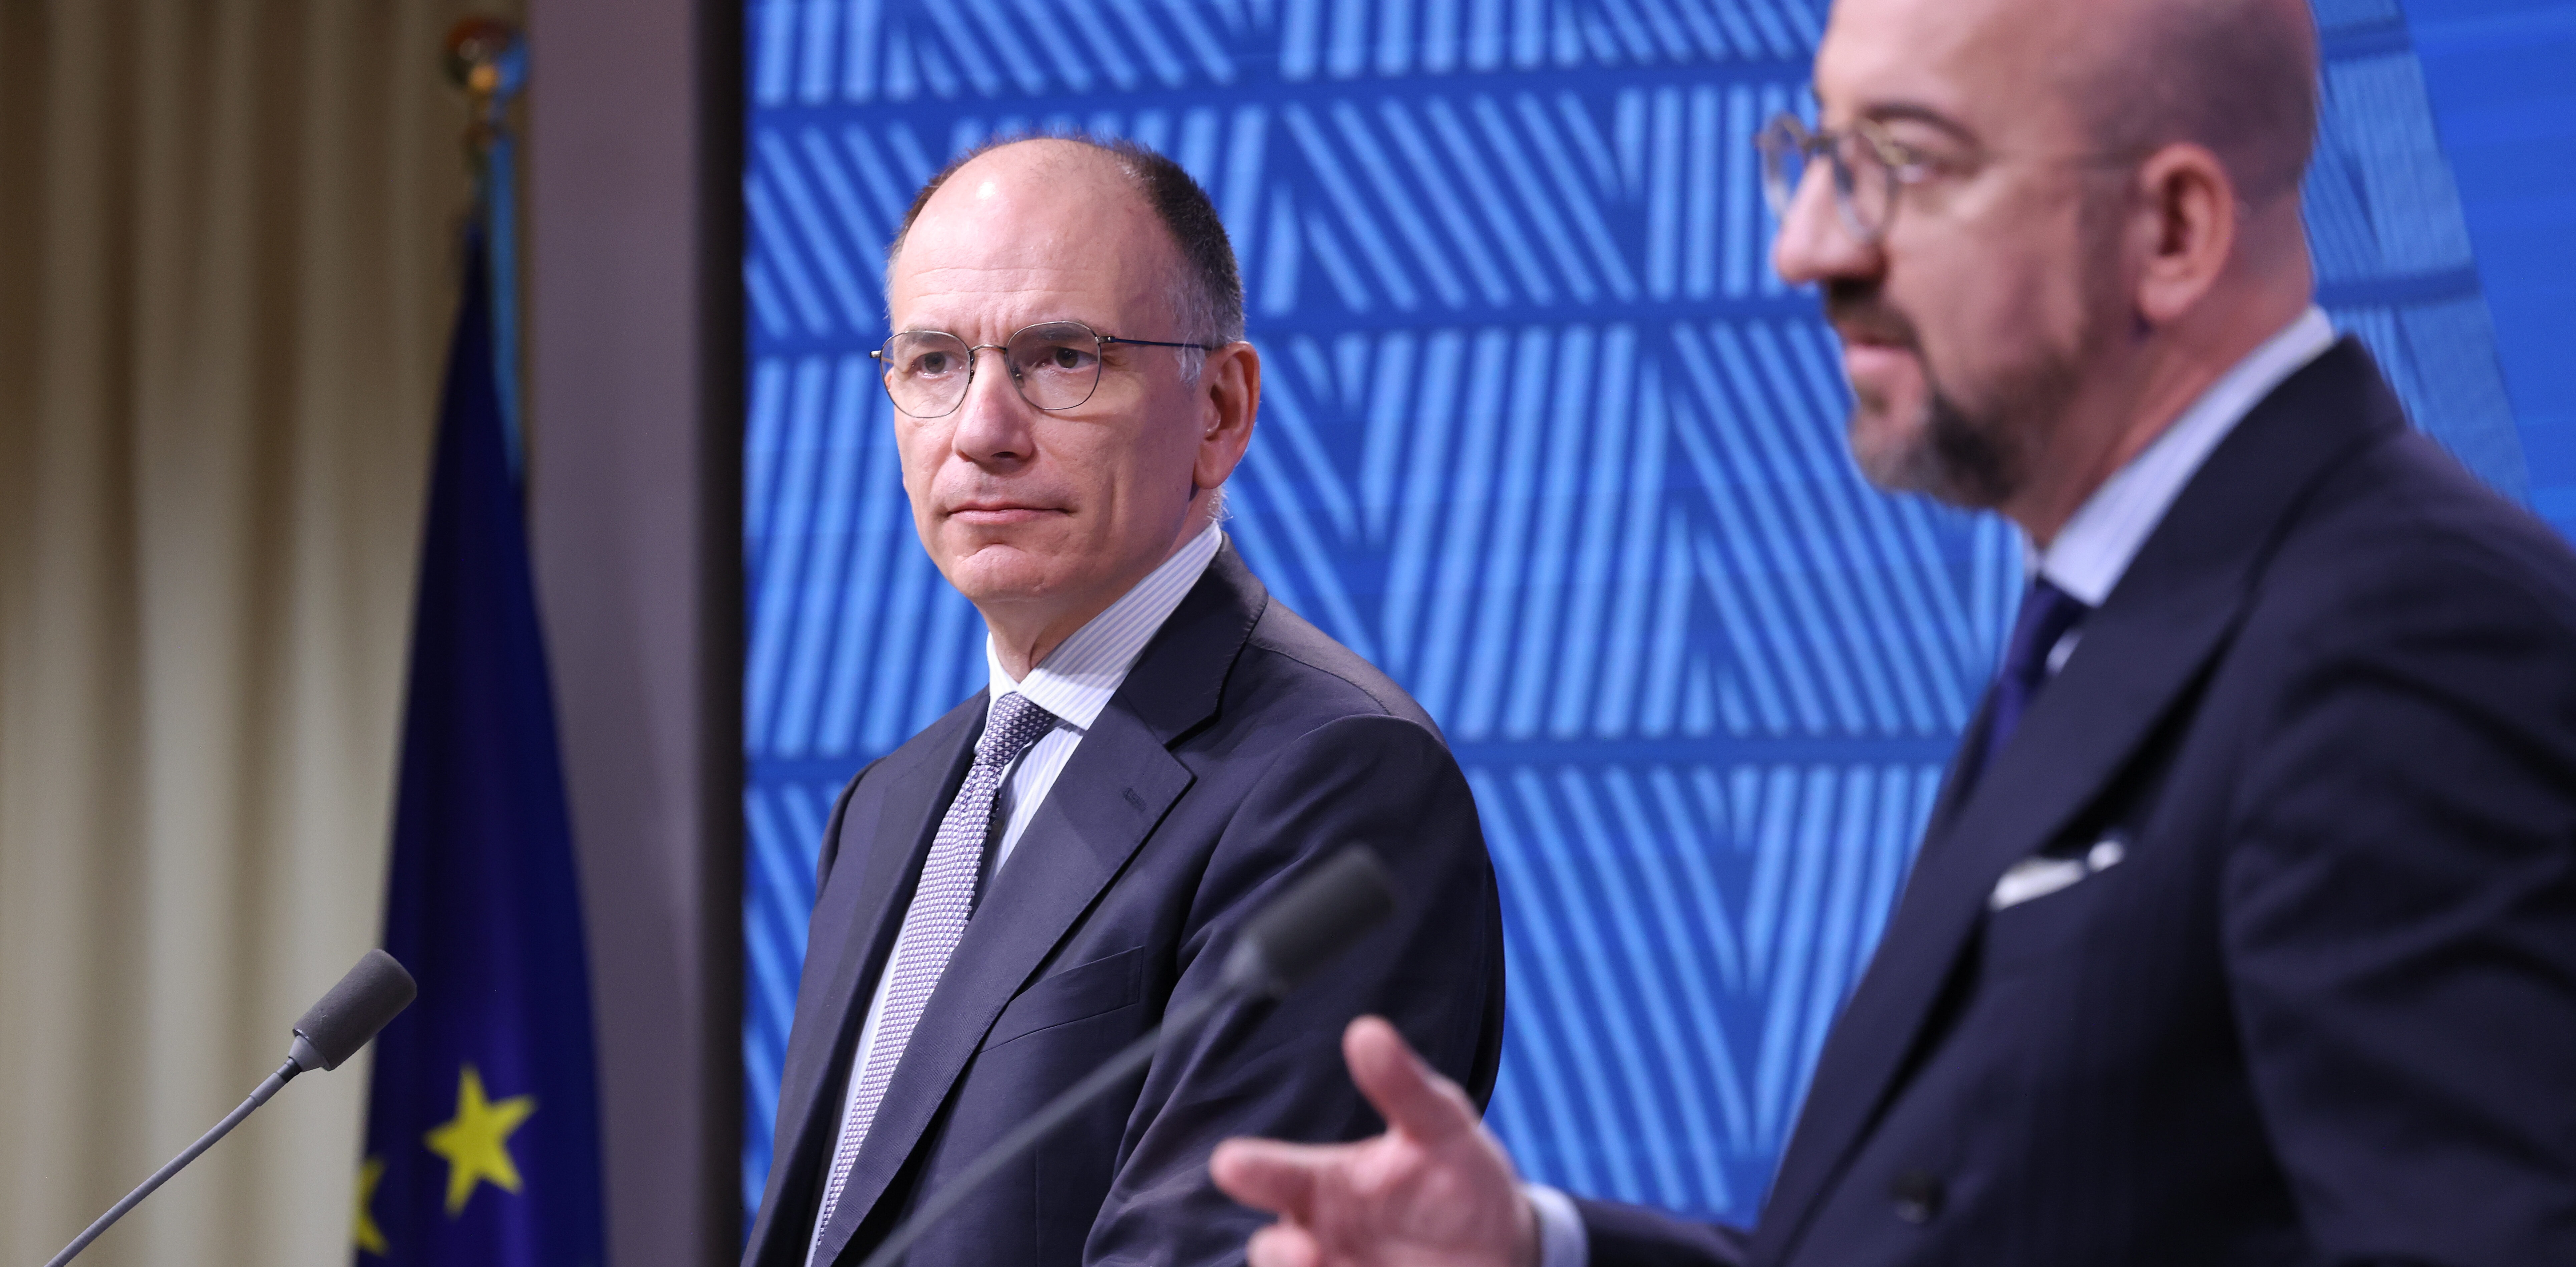 A fair green and digital transition is a catalyst for change, says Letta report